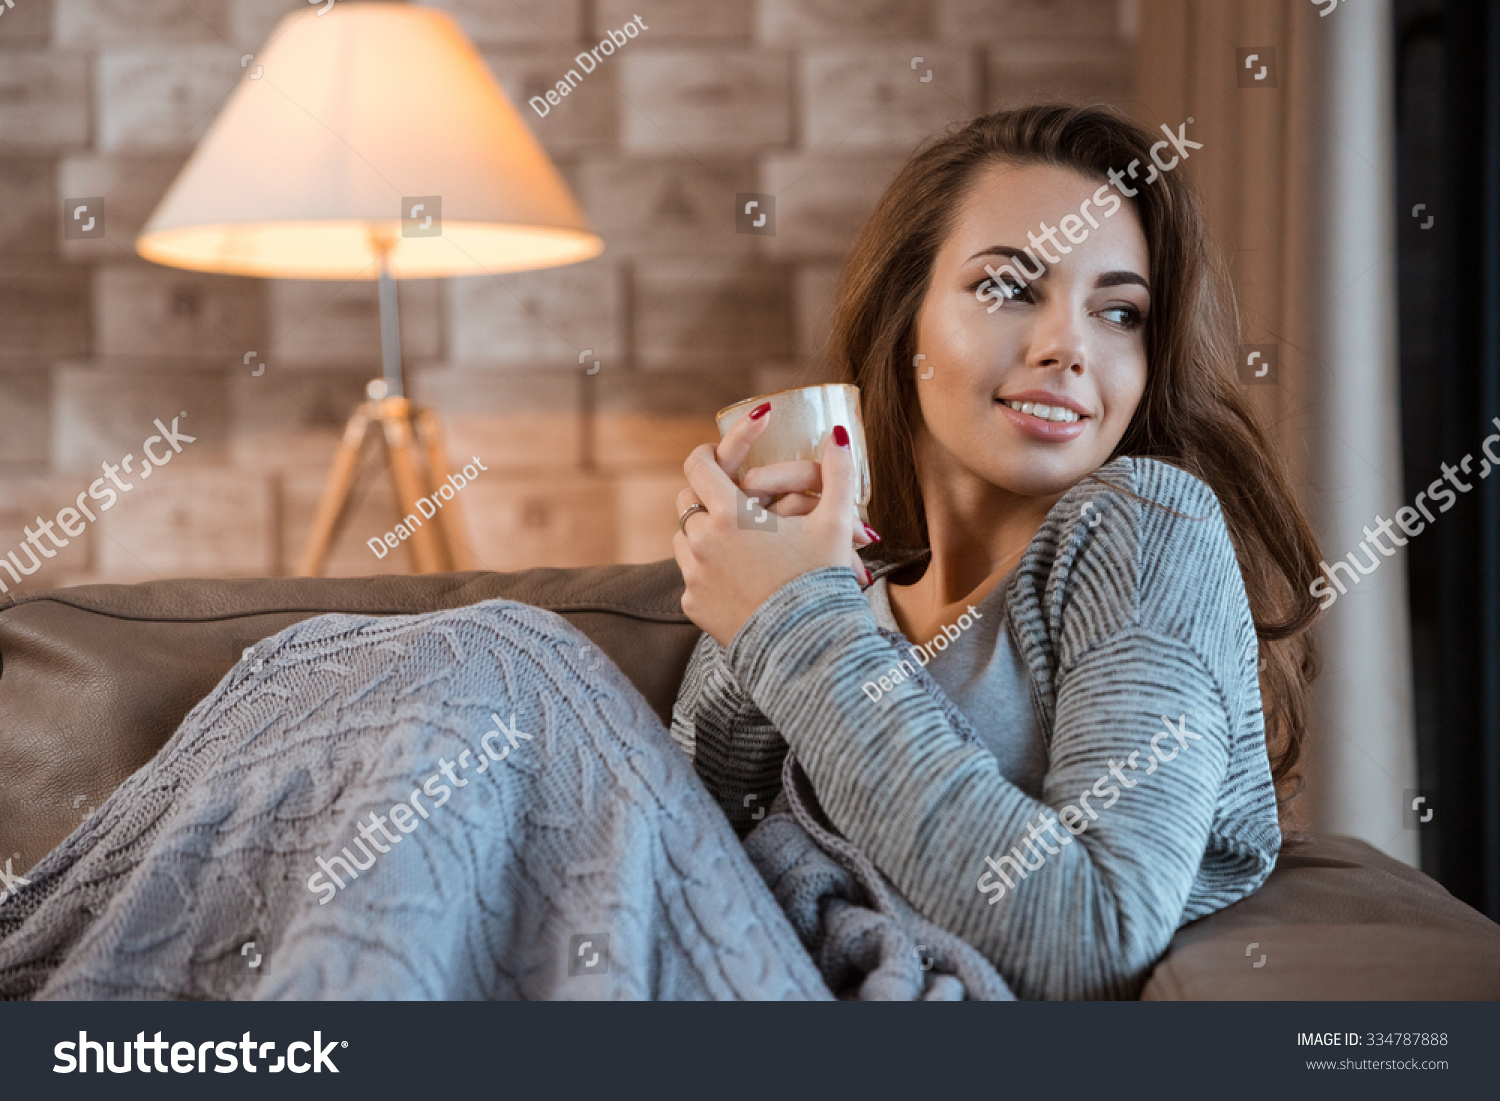 Pretty smiling girl wearing in gray clothes sitting on sofa and holding a glass #334787888